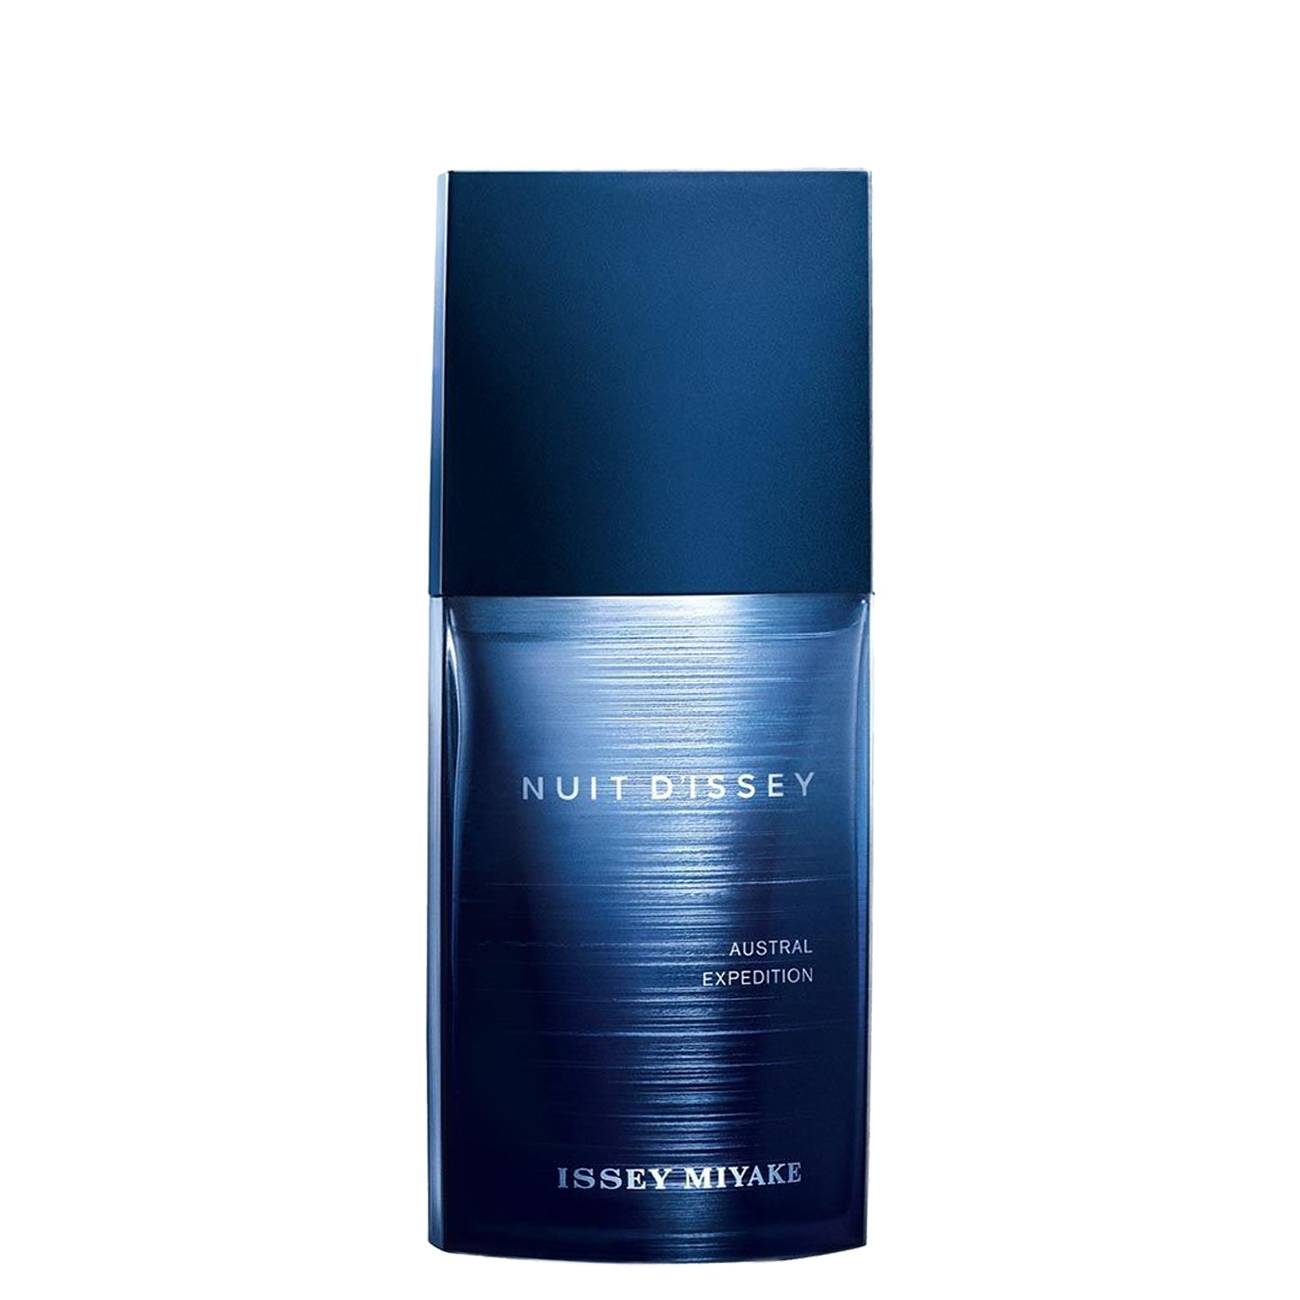 NUIT D'ISSEY AUSTRAL EXPEDITION 125ml poza